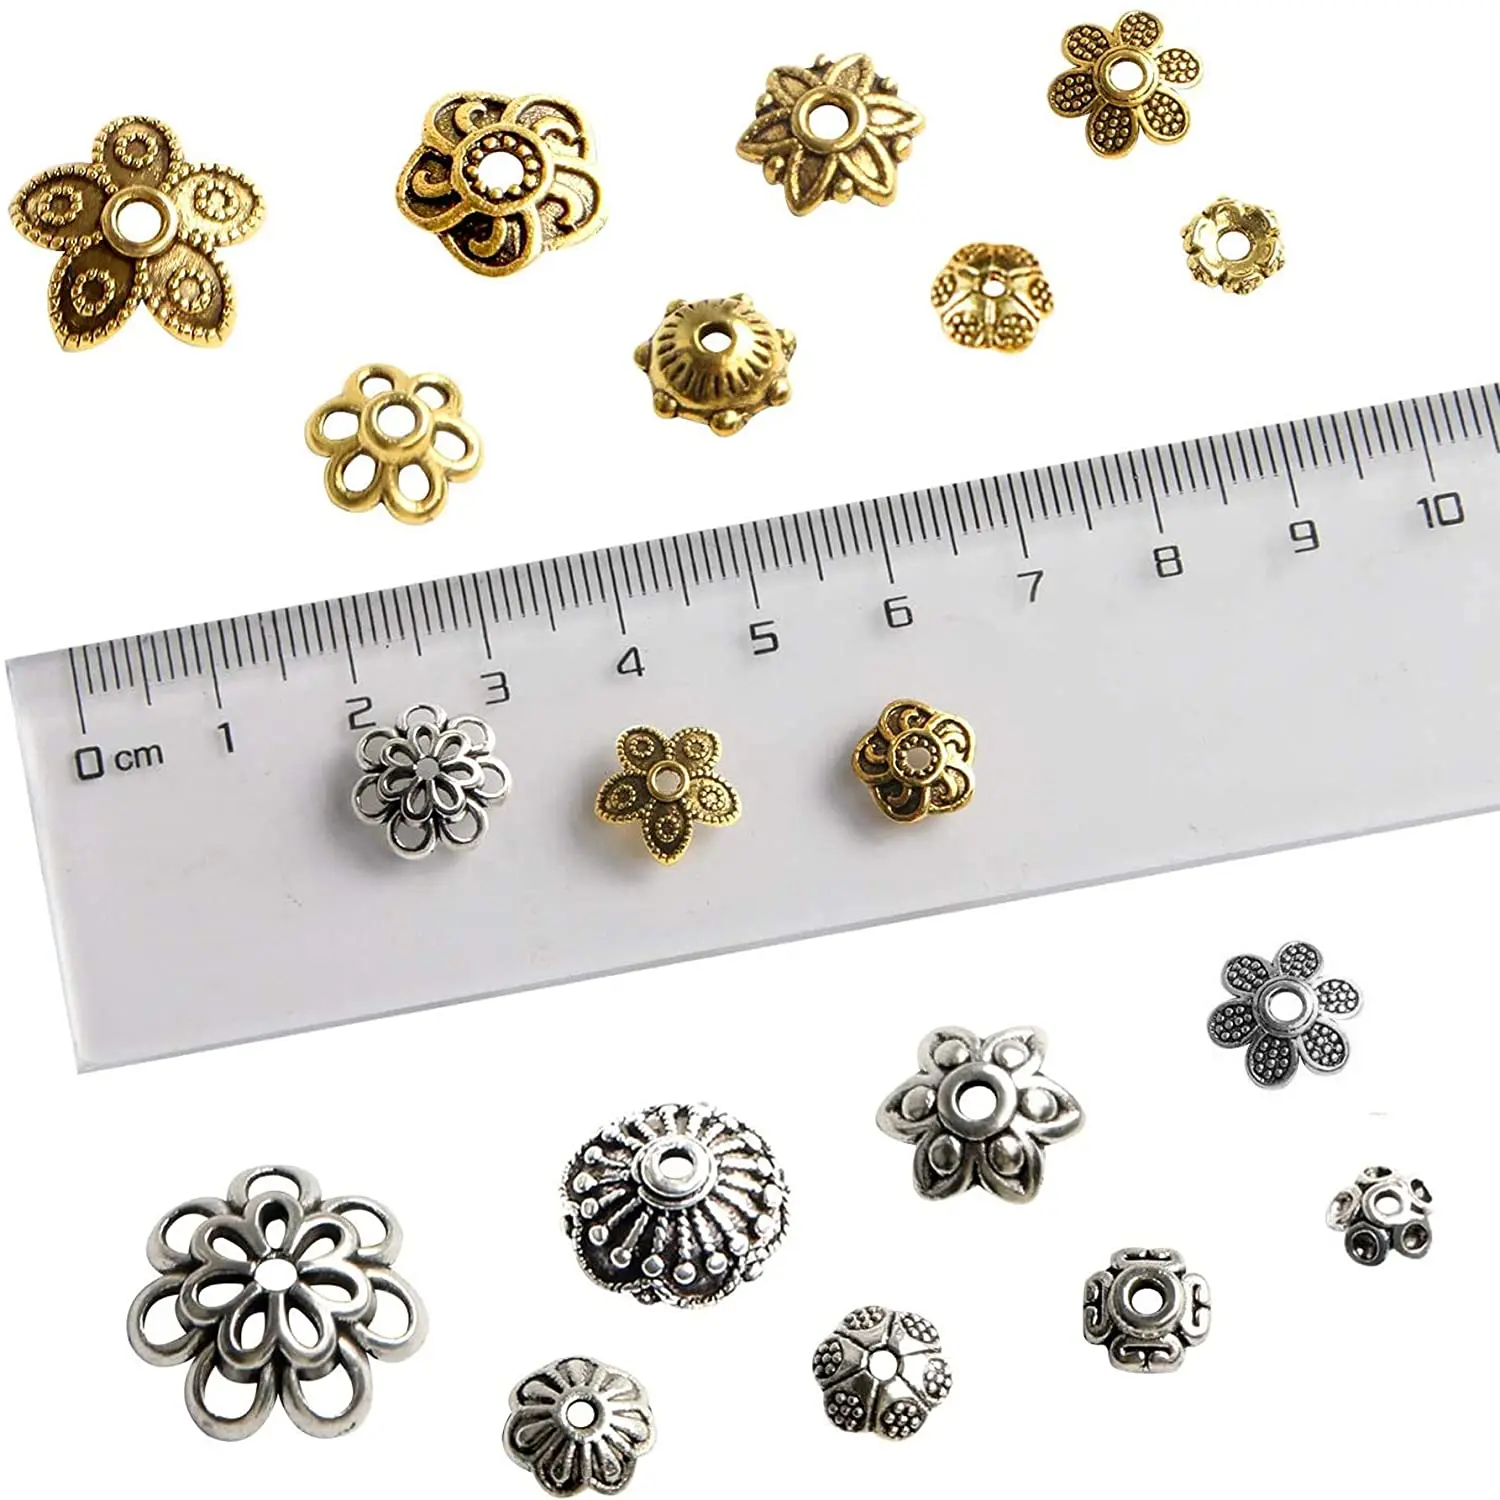 Antique Gold Beads Assorted milageto Wholesale Tibetan Bead Cap Jewelry Making End Caps Spacers Findings DIY Handmade 